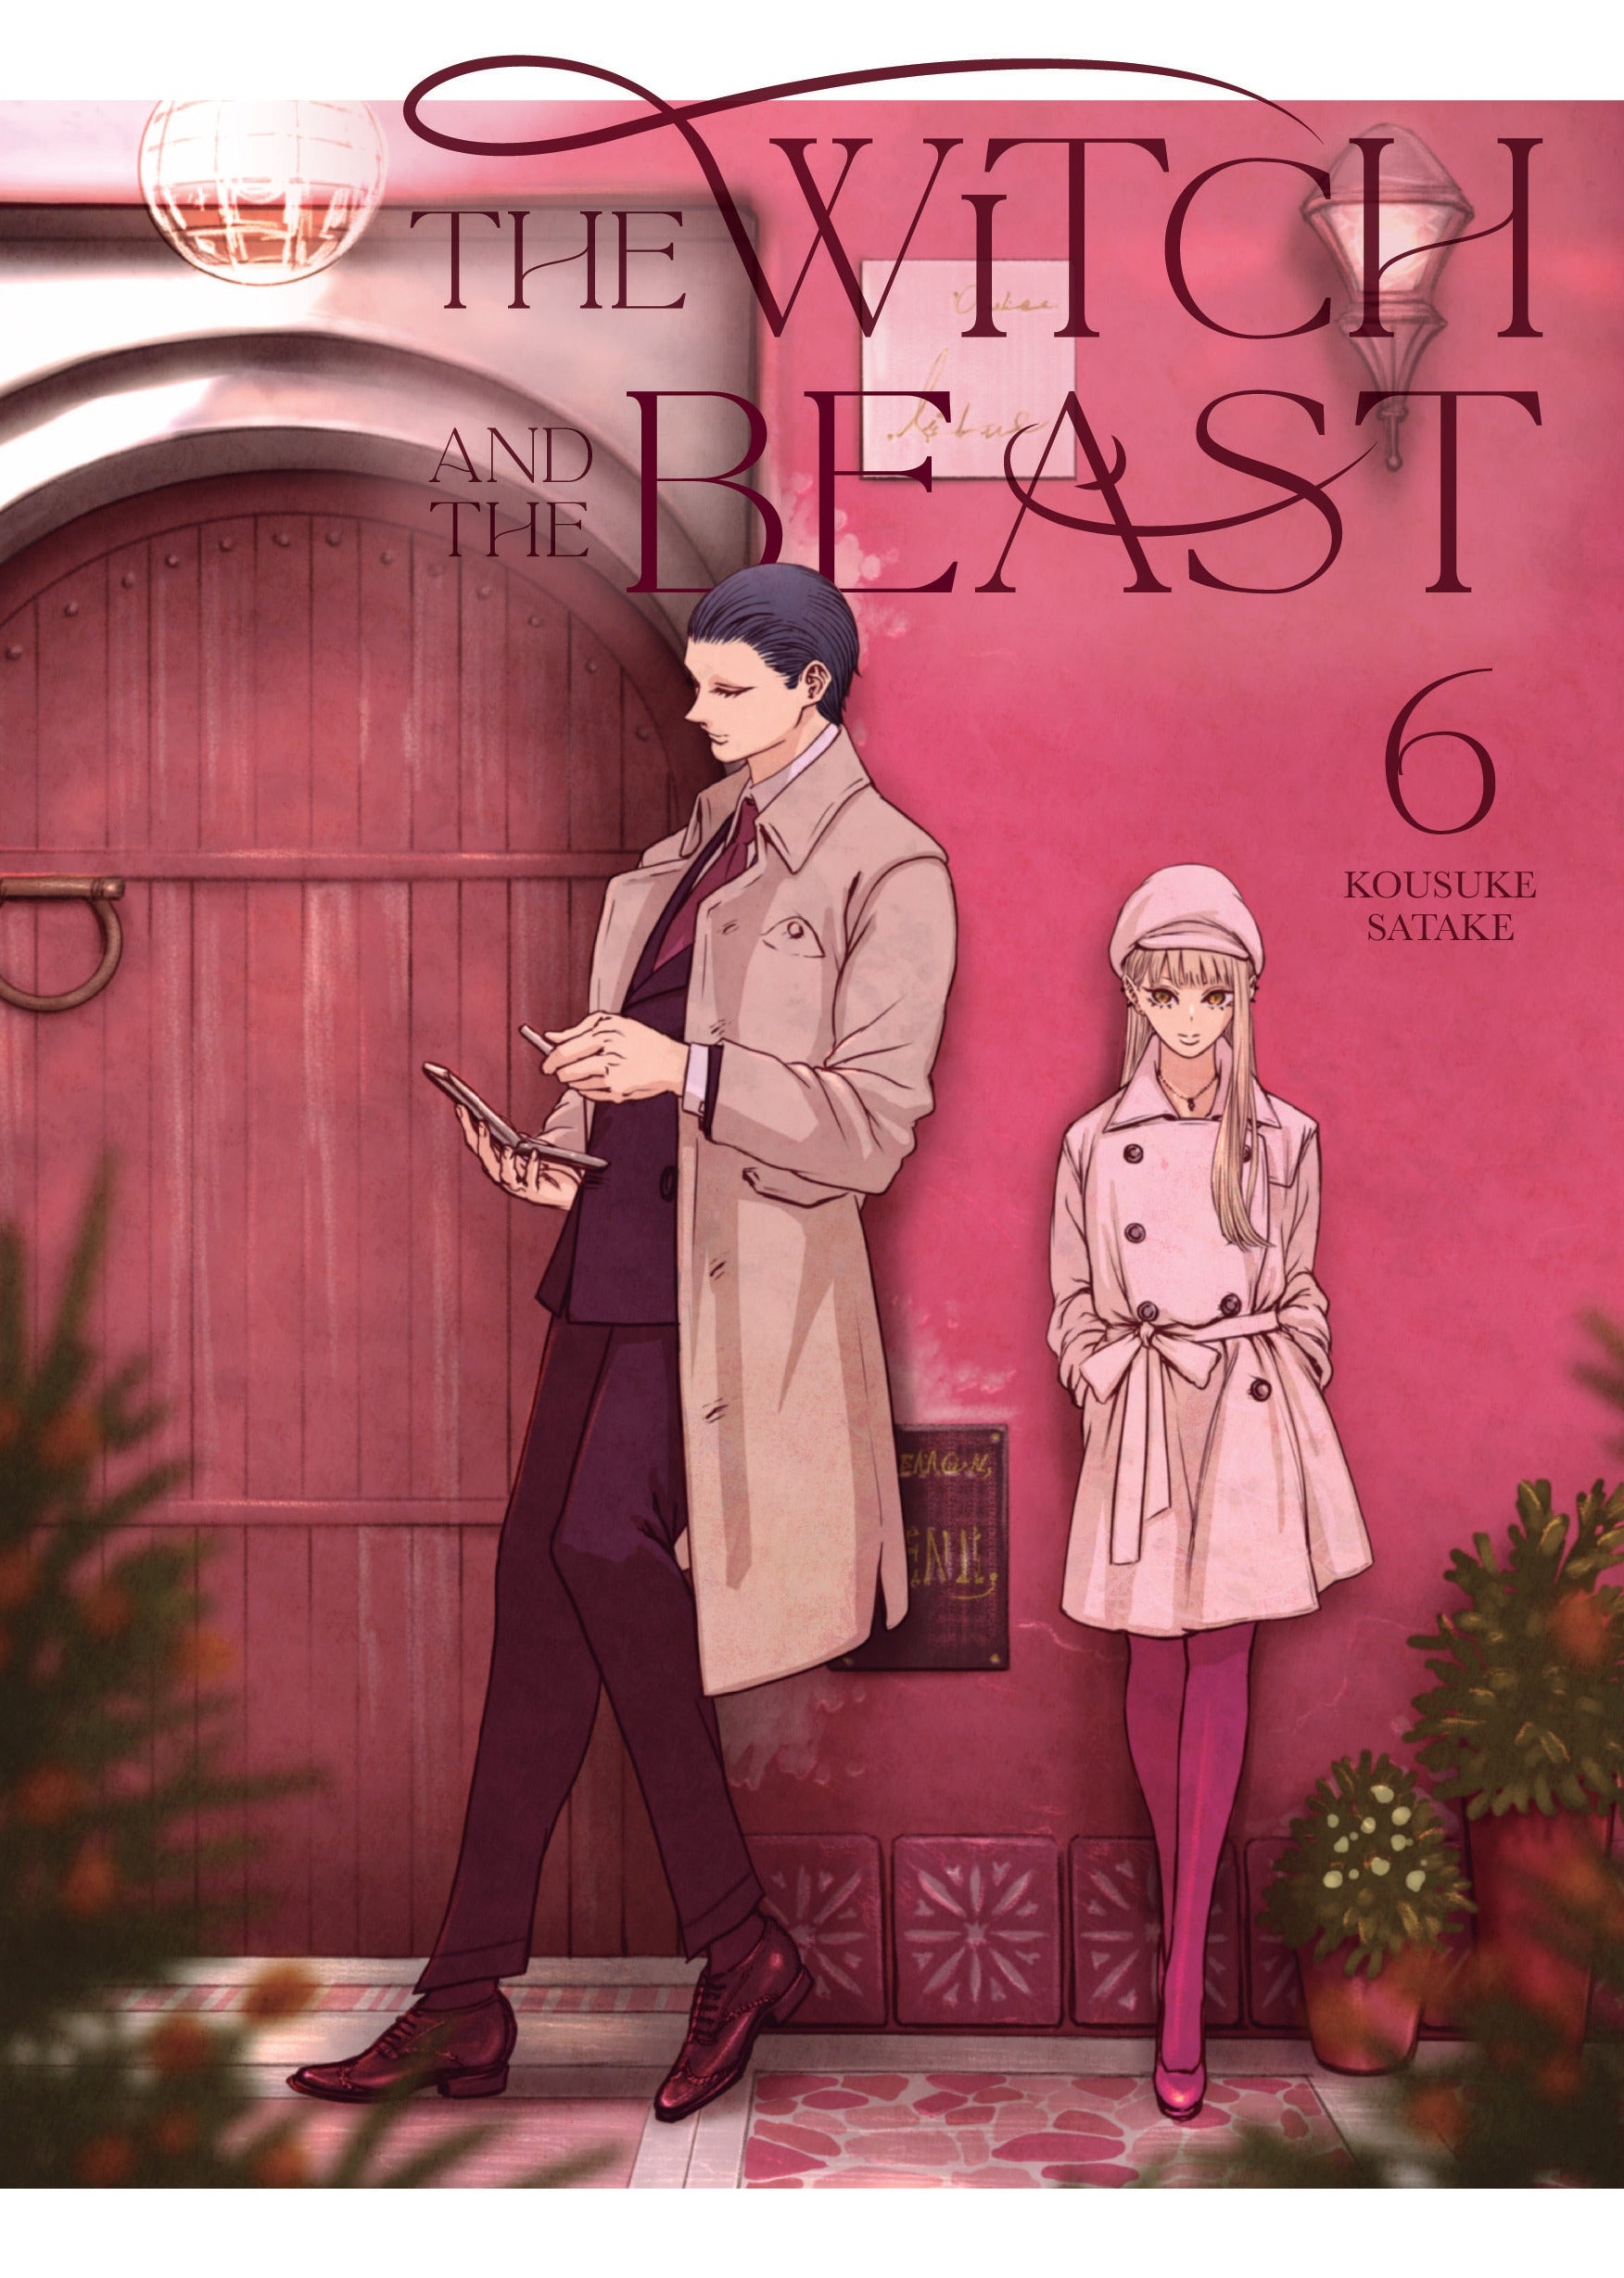 The Witch and the Beast 6 - Manga Warehouse